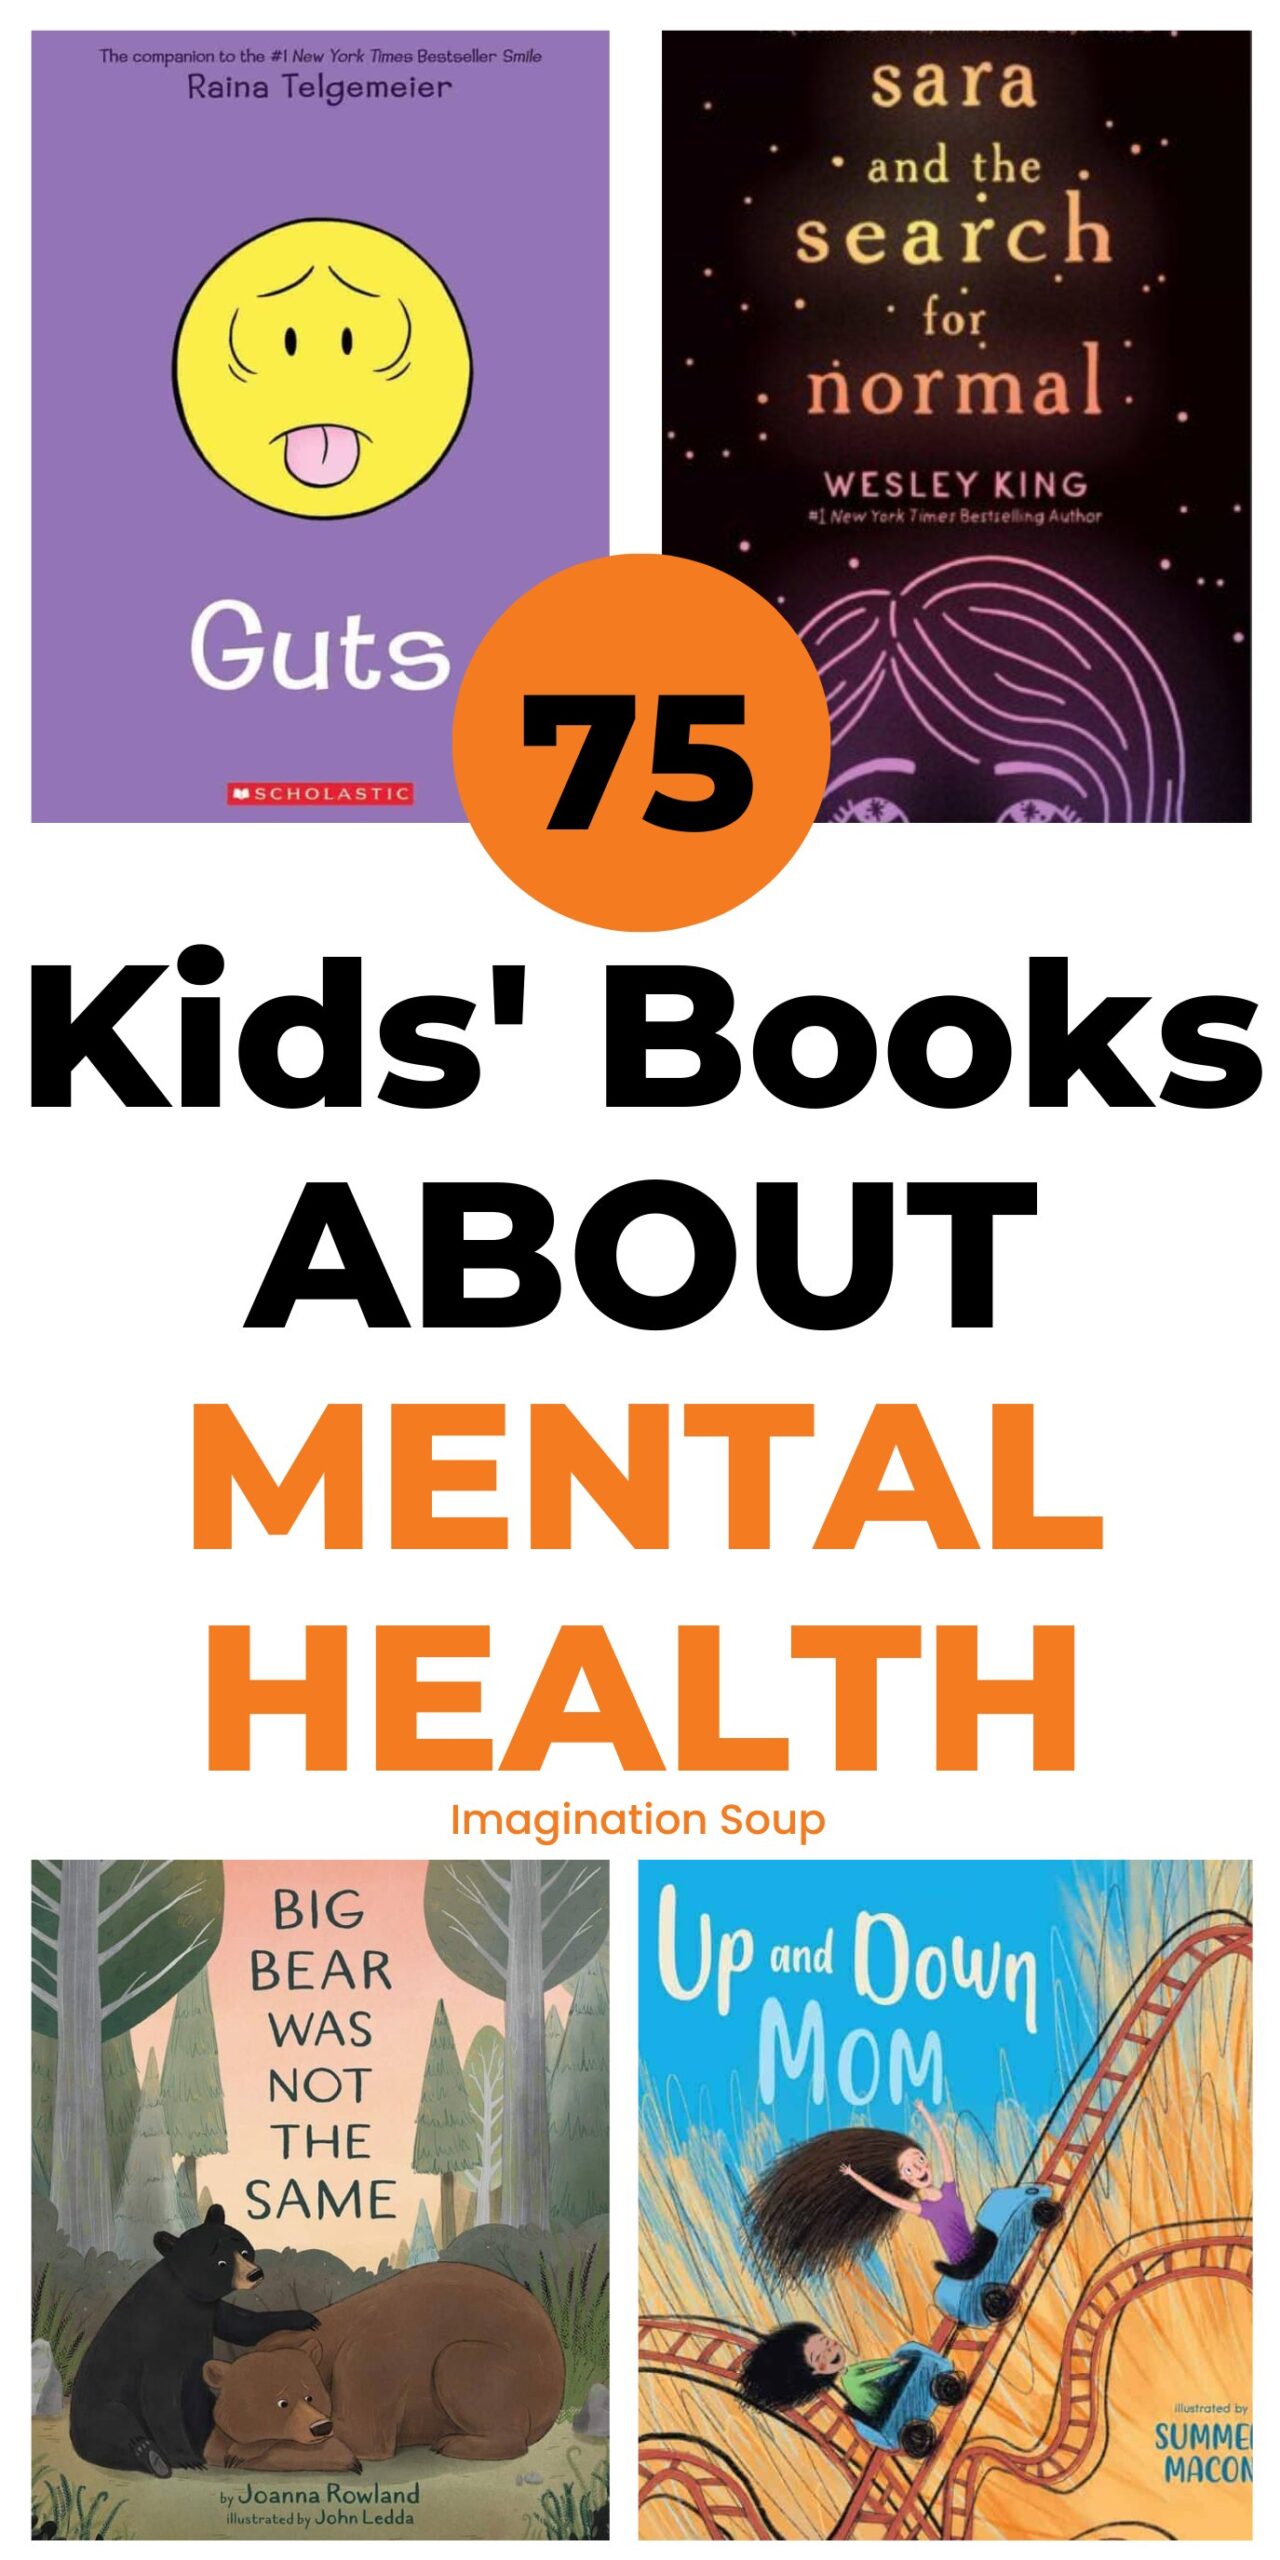 If you're facing mental health illness in your family or you know someone who is, help your children understand by reading children's picture books, chapter books, middle grade books, and YA books about mental health with characters who have depression, OCD, bipolar disorder, PTSD, schizophrenia, or other mental illnesses.